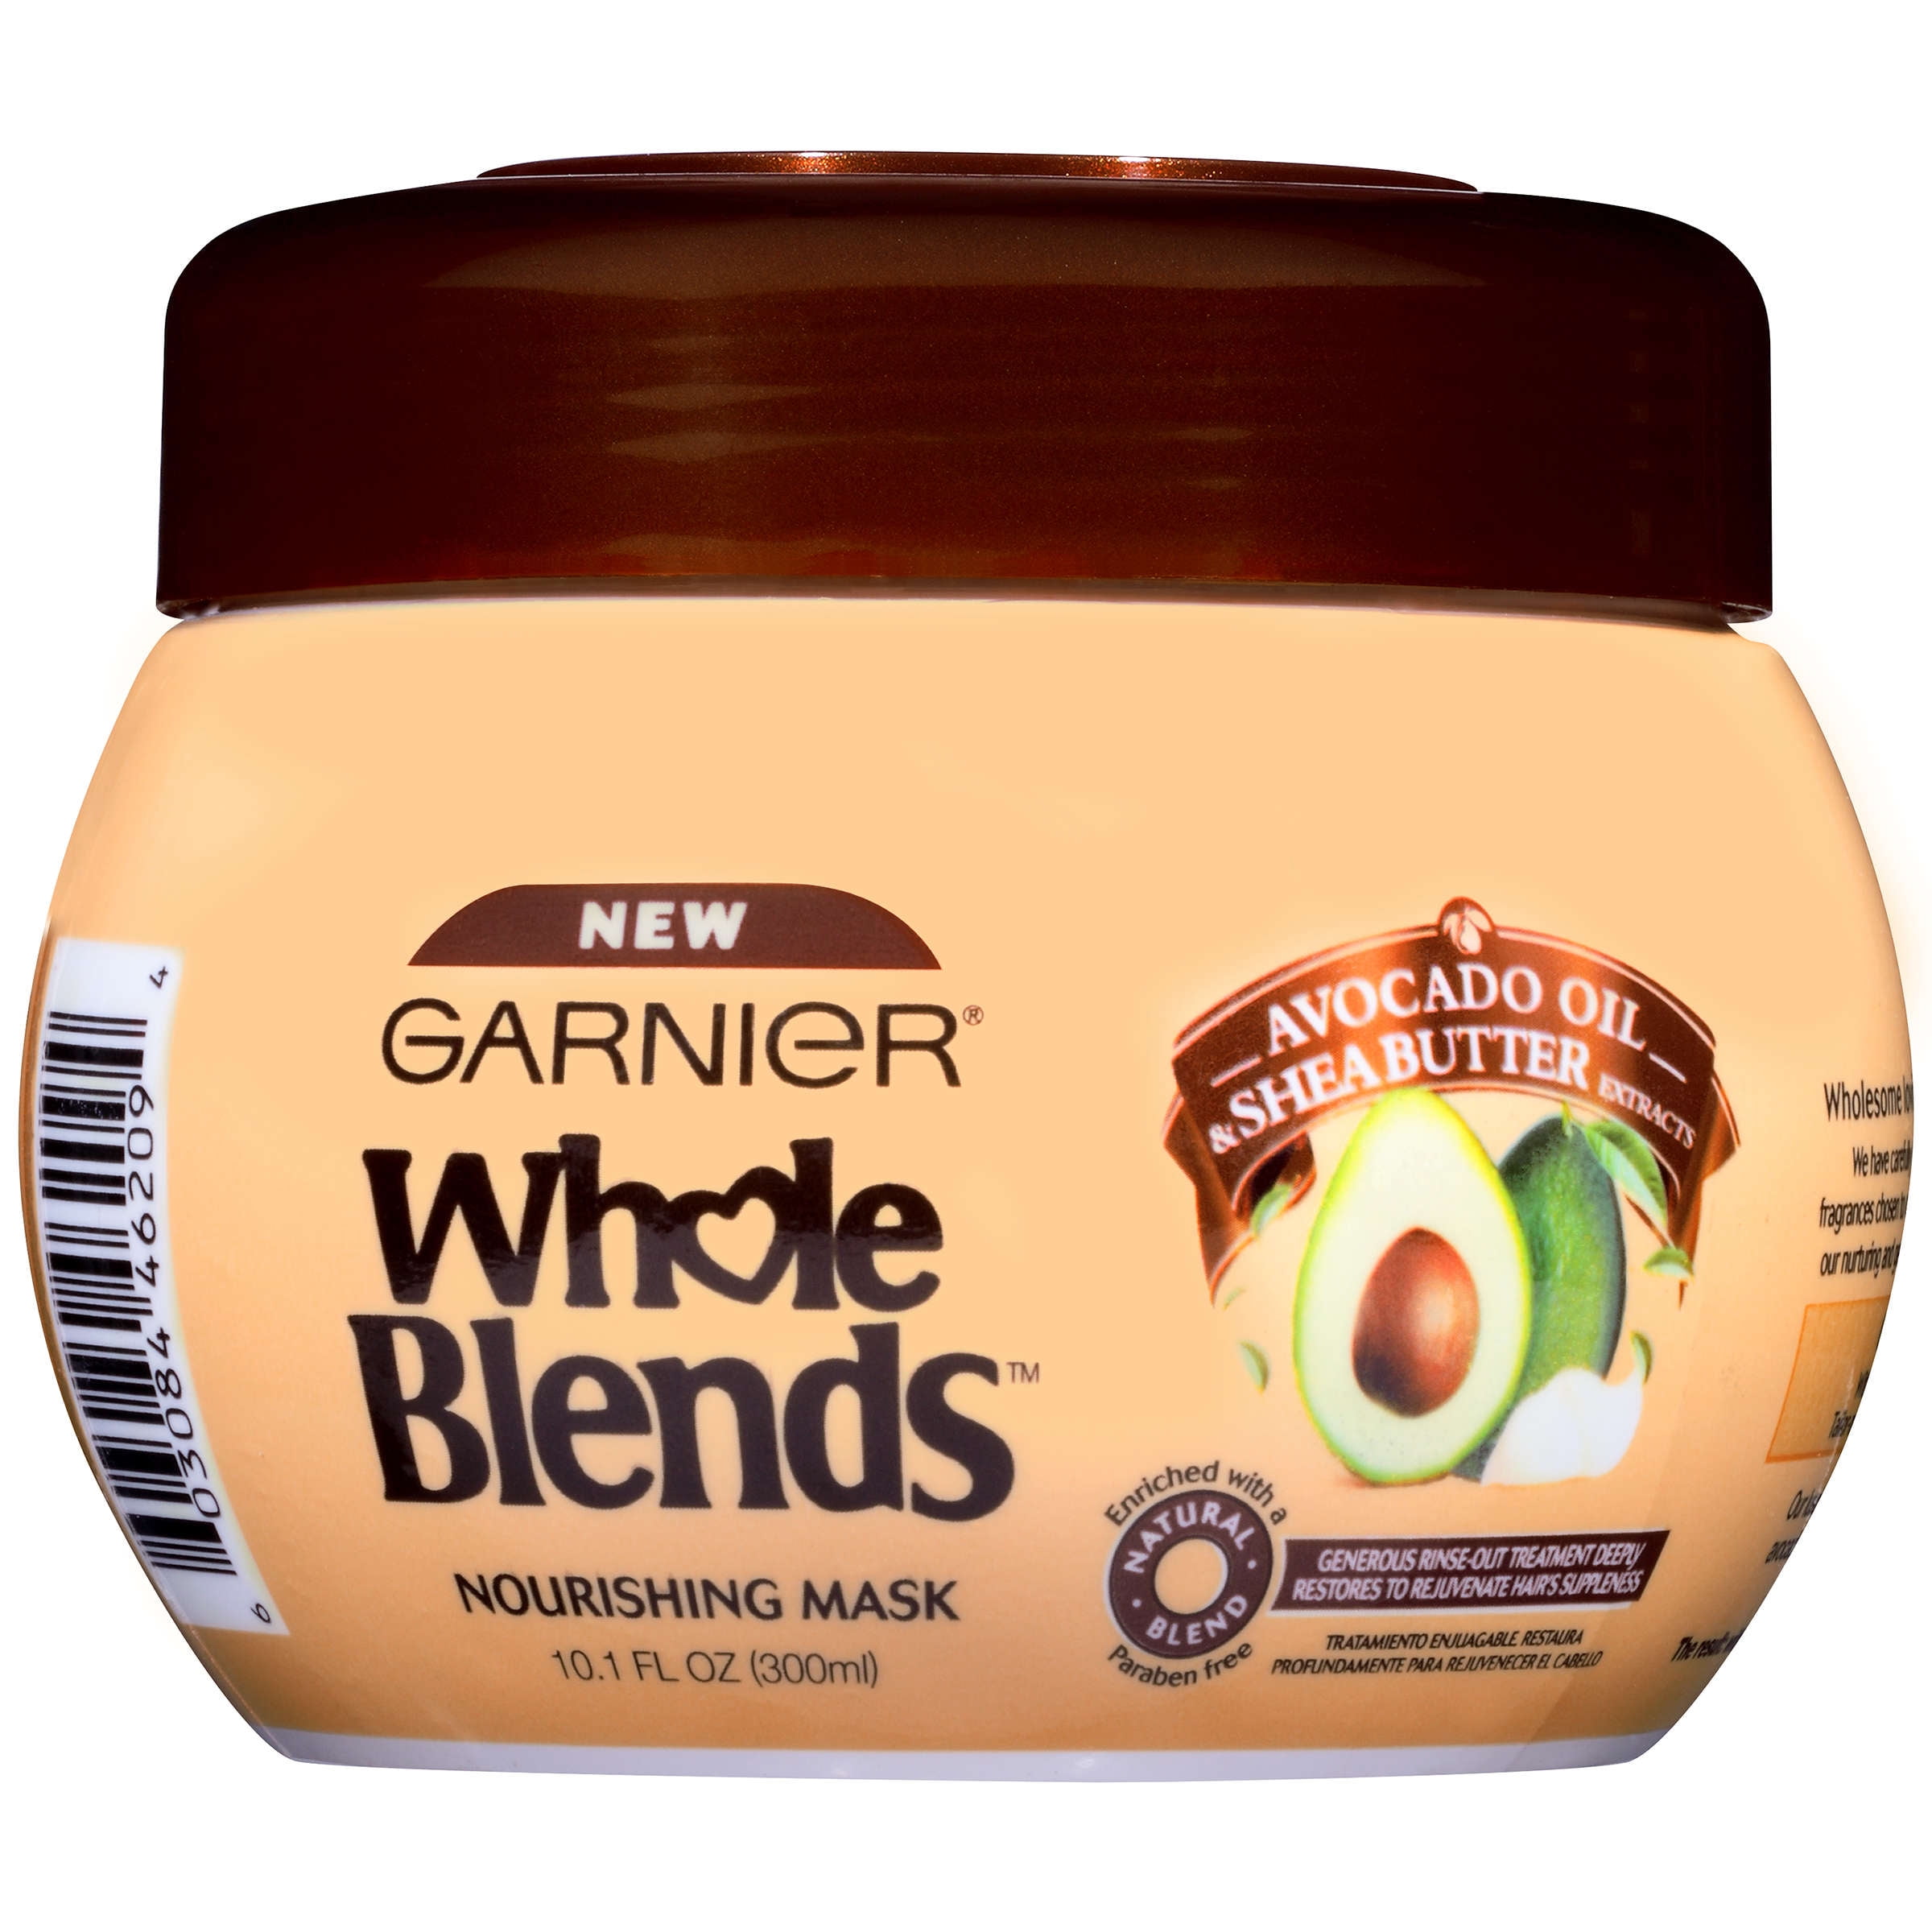 Whole Blends Hair Mask with Avocado Oil & Shea Butter Extracts 10.1 FL OZ - Walmart.com